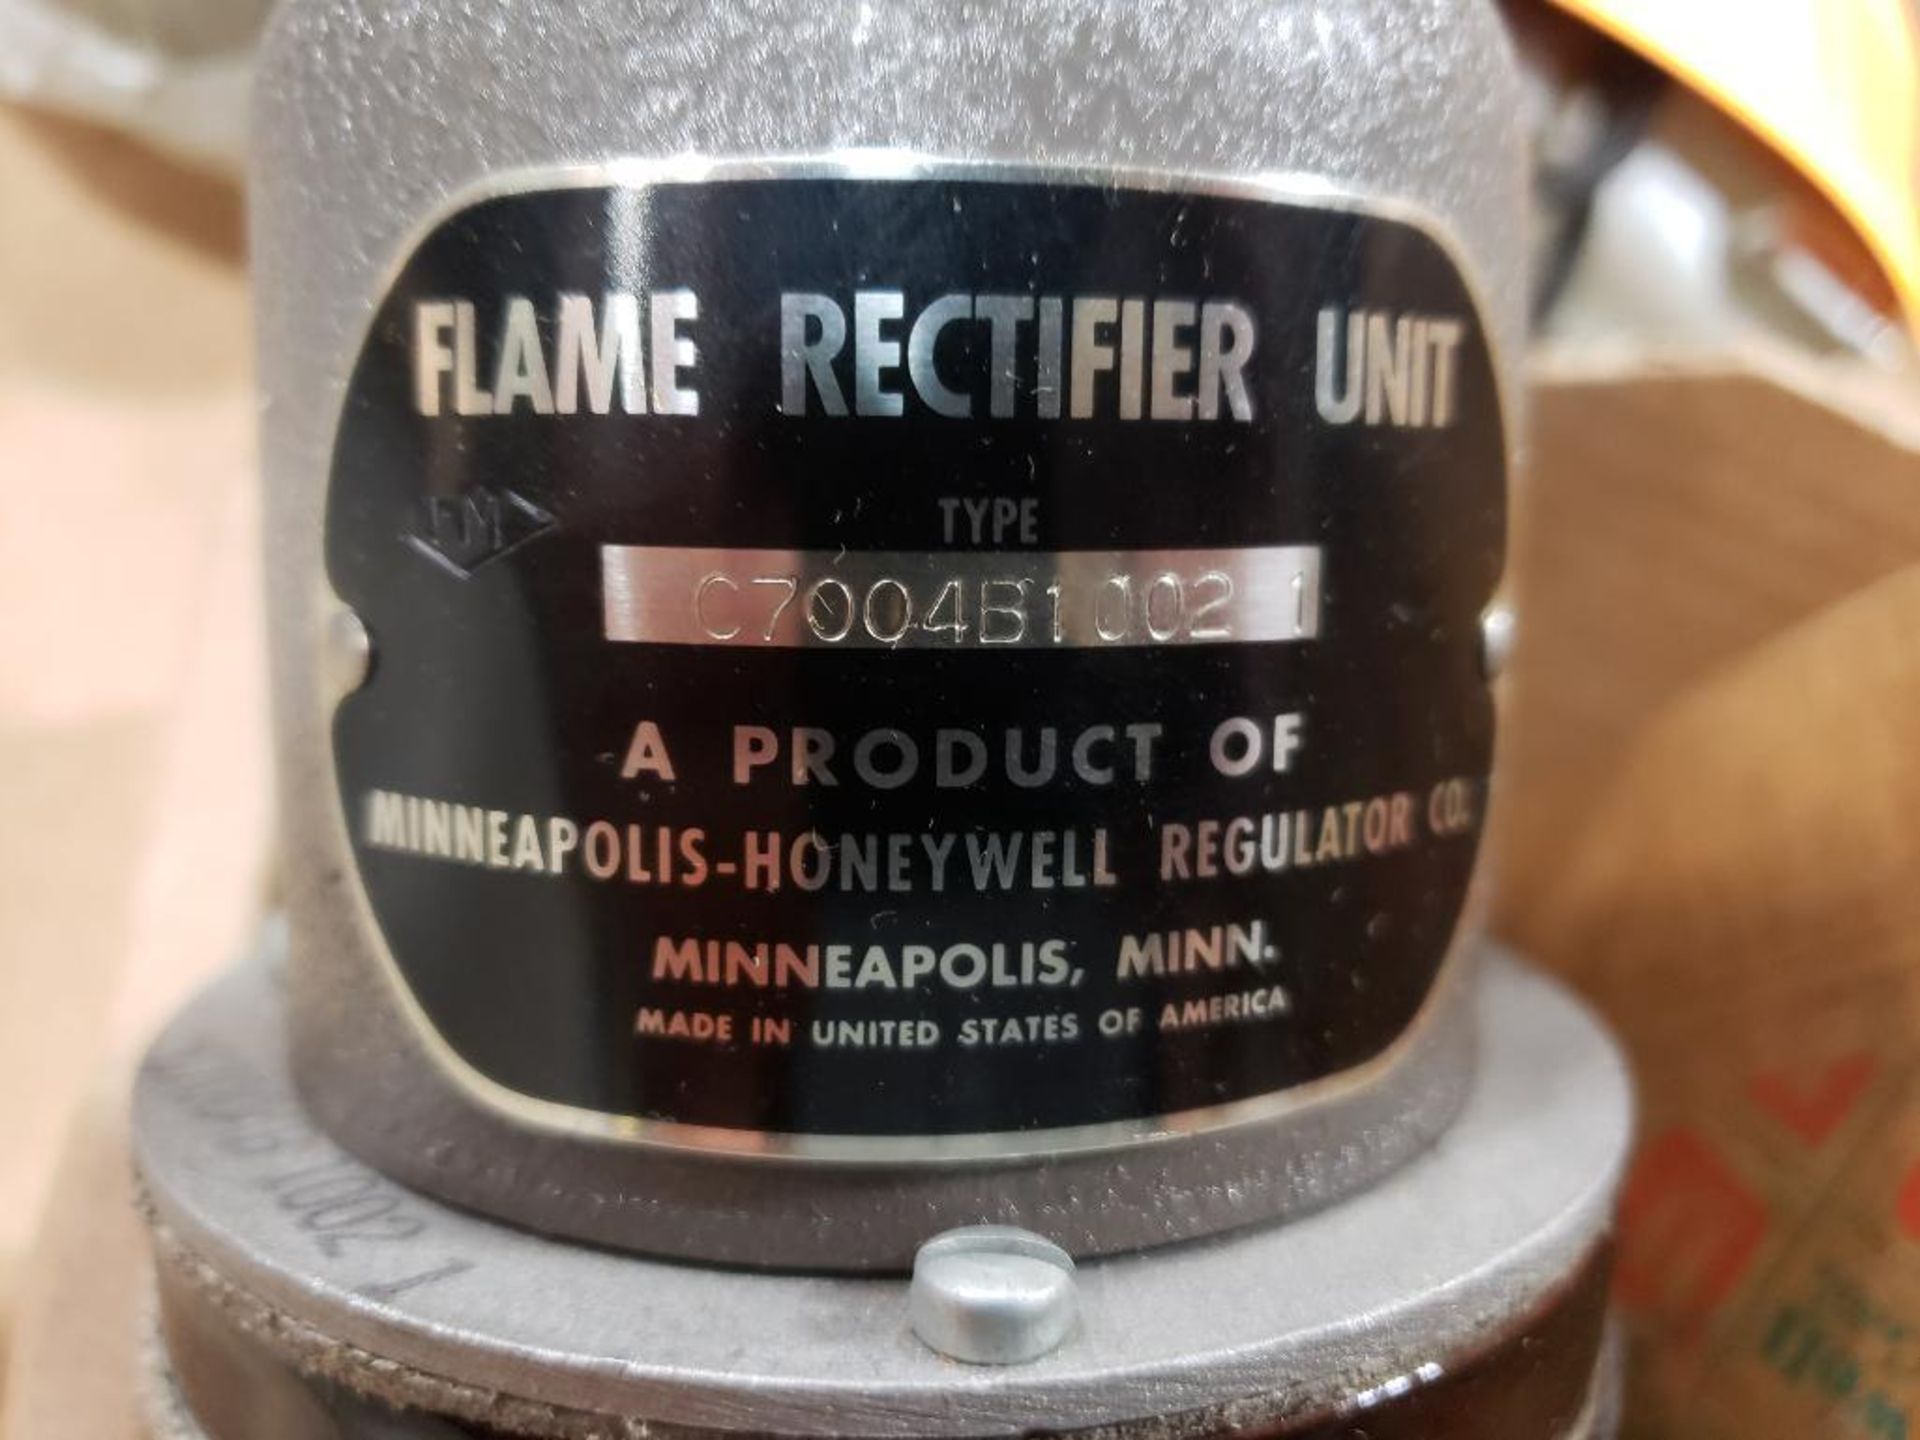 Honeywell C7004B1002-1 Fame Rectifier Unit. New in box. - Image 3 of 3